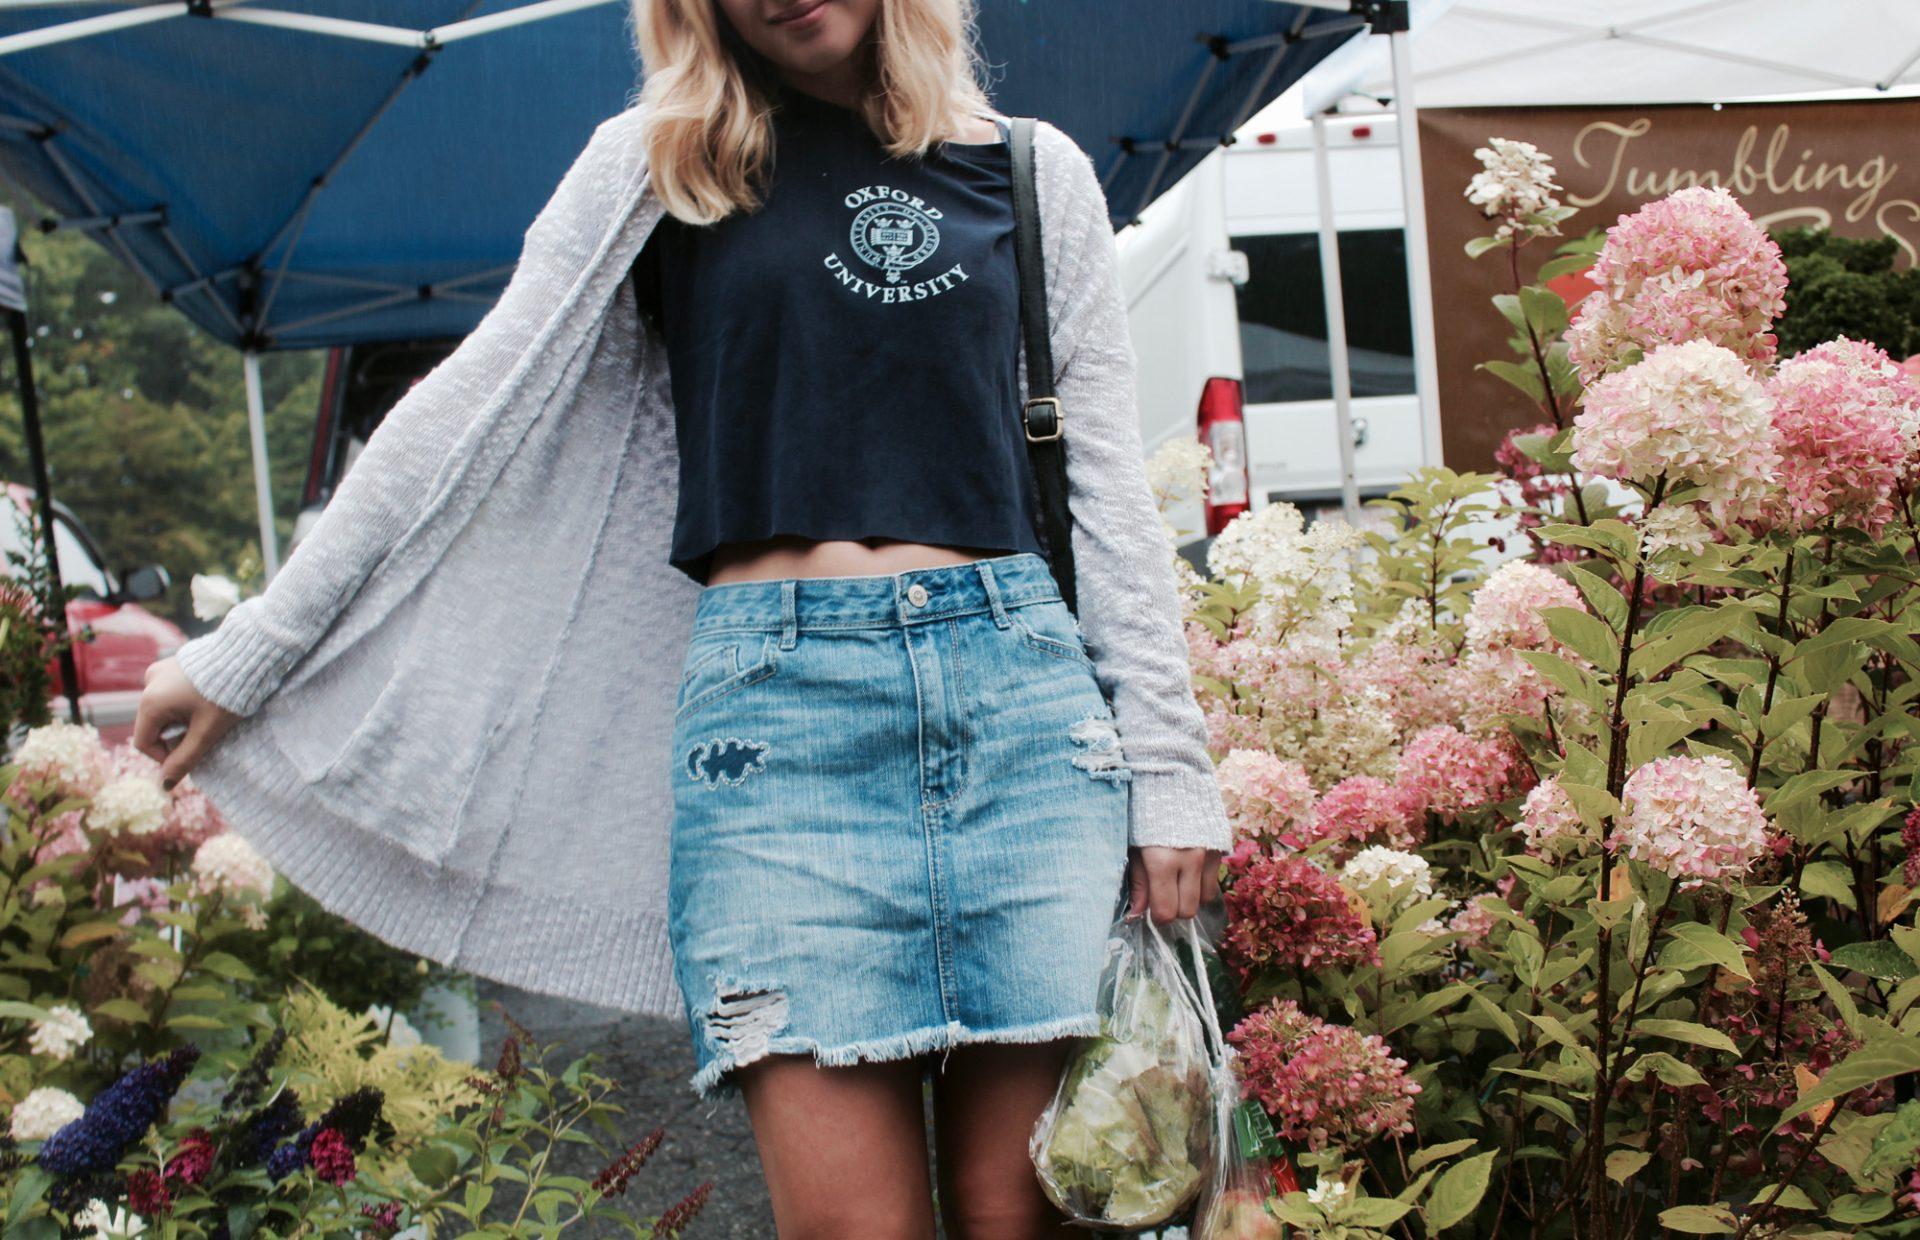 Hayley+Hughes+modeling+a+denim+skirt+titled+Upcycled+Moon+Cloud+Skirt.+This+skirt+was+designed+by+the+Raining+Sunshine+Co.